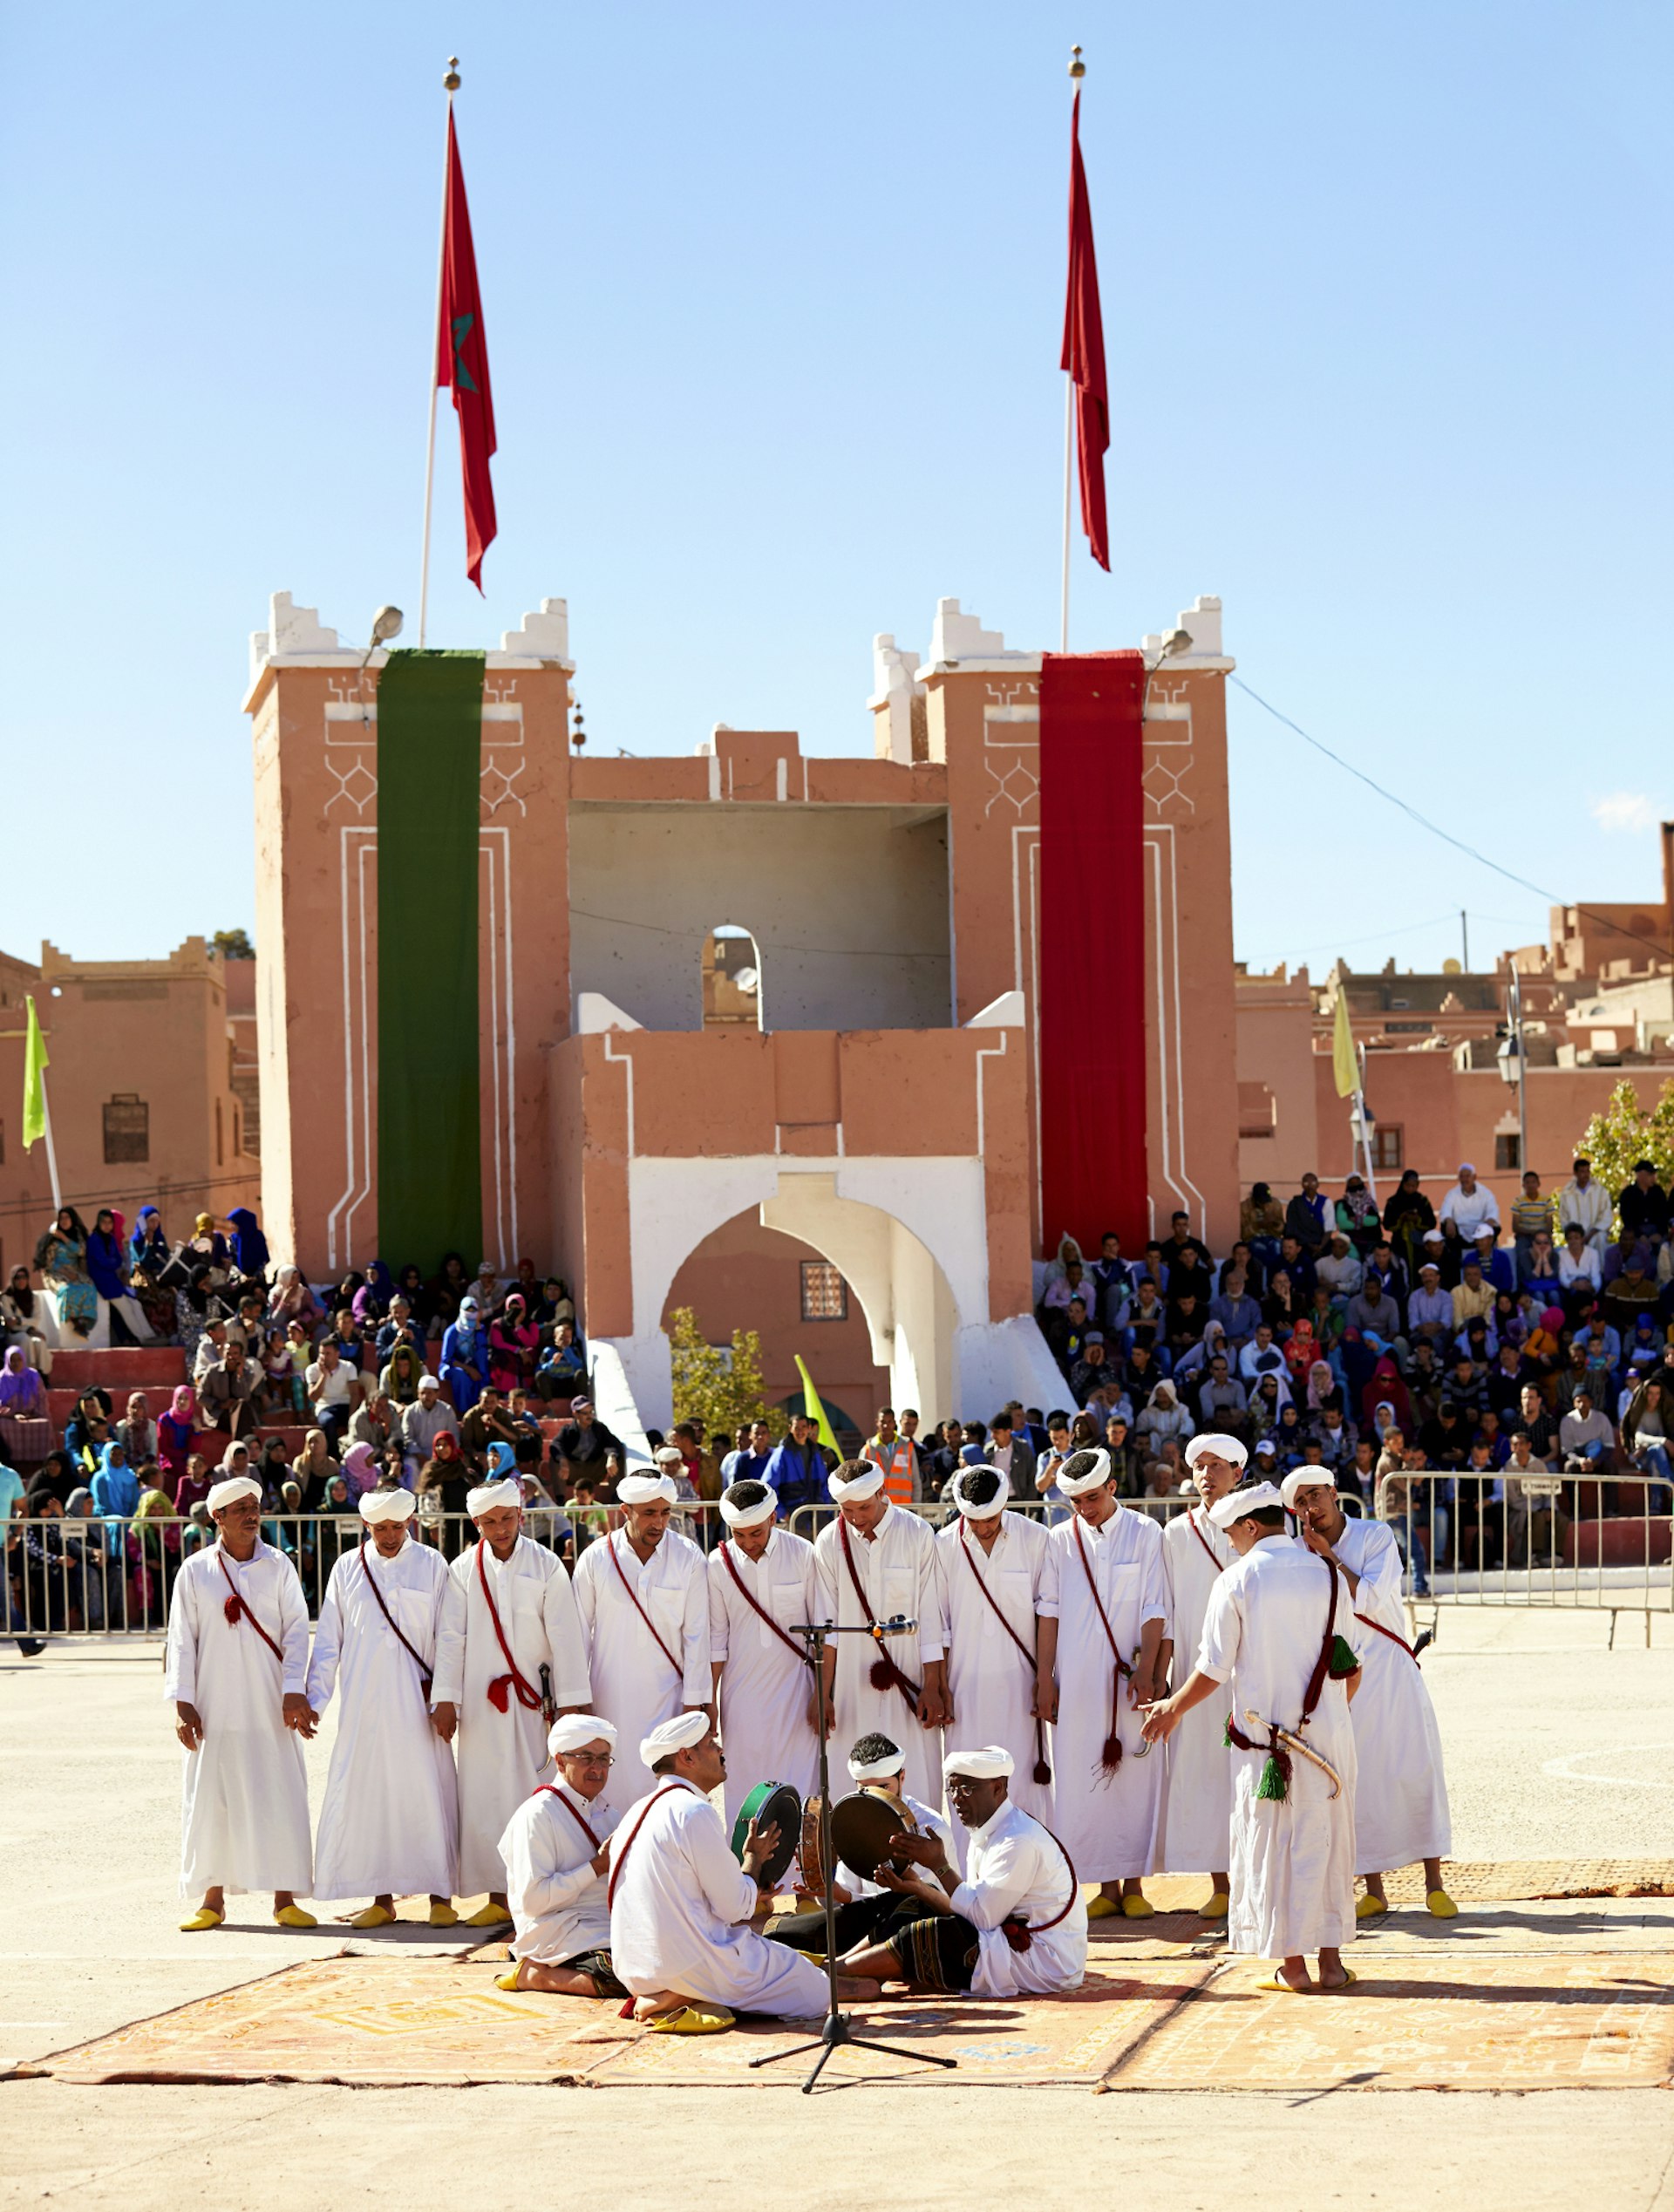 Men perform a traditional dance at the Rose Festival in Kalaat M'Gouna, Morocco